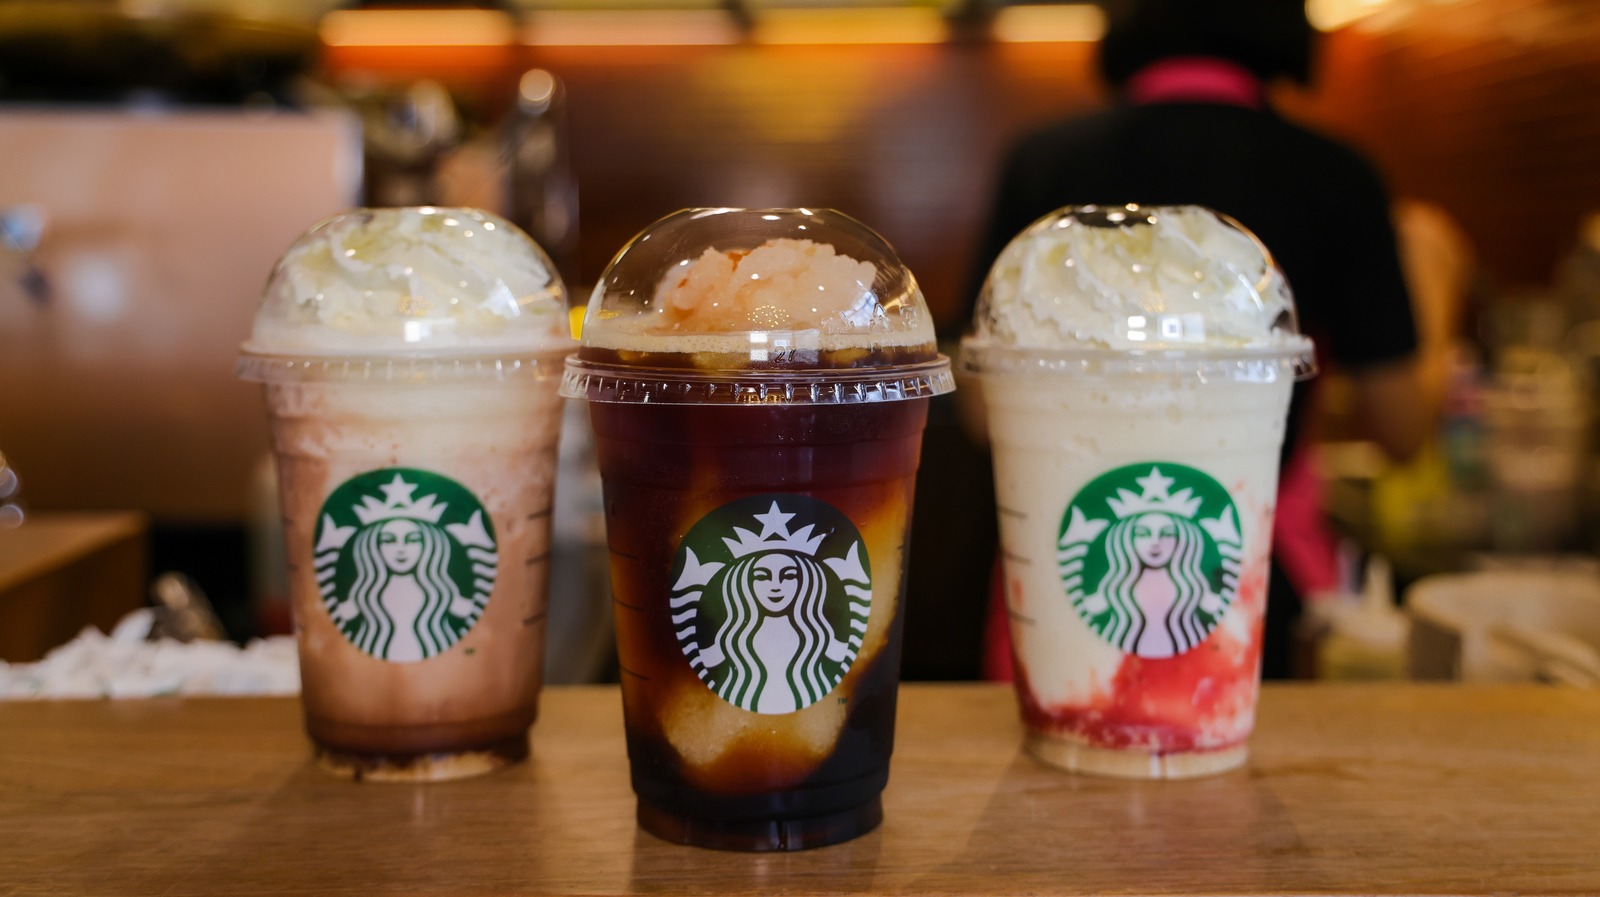 https://www.thedailymeal.com/img/gallery/starbucks-is-tackling-those-extra-customized-orders-with-a-new-machine-patent/l-intro-1677002921.jpg